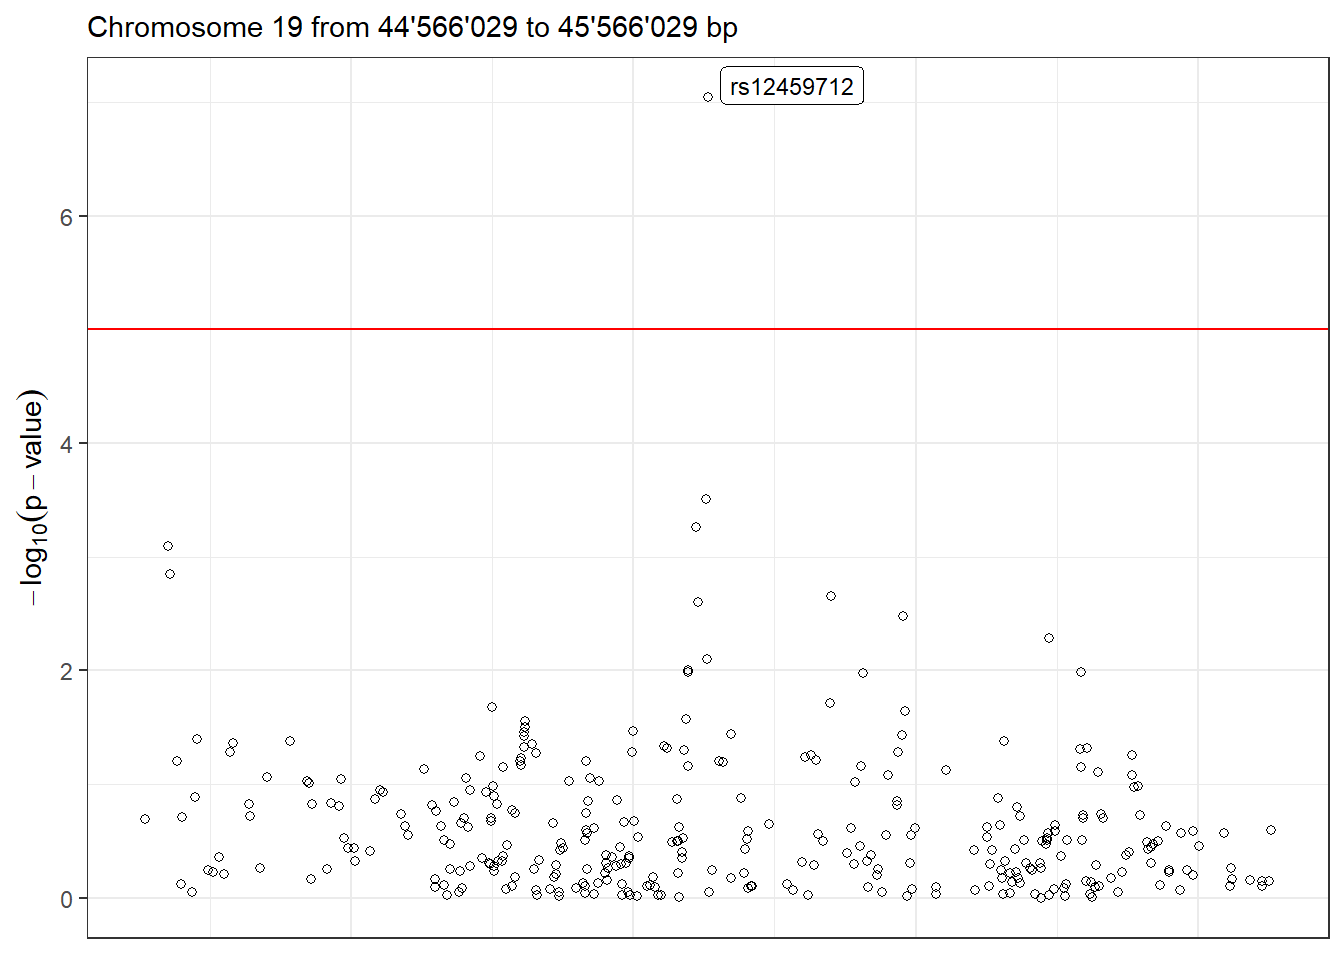 LocusZoom plot of the complete data.